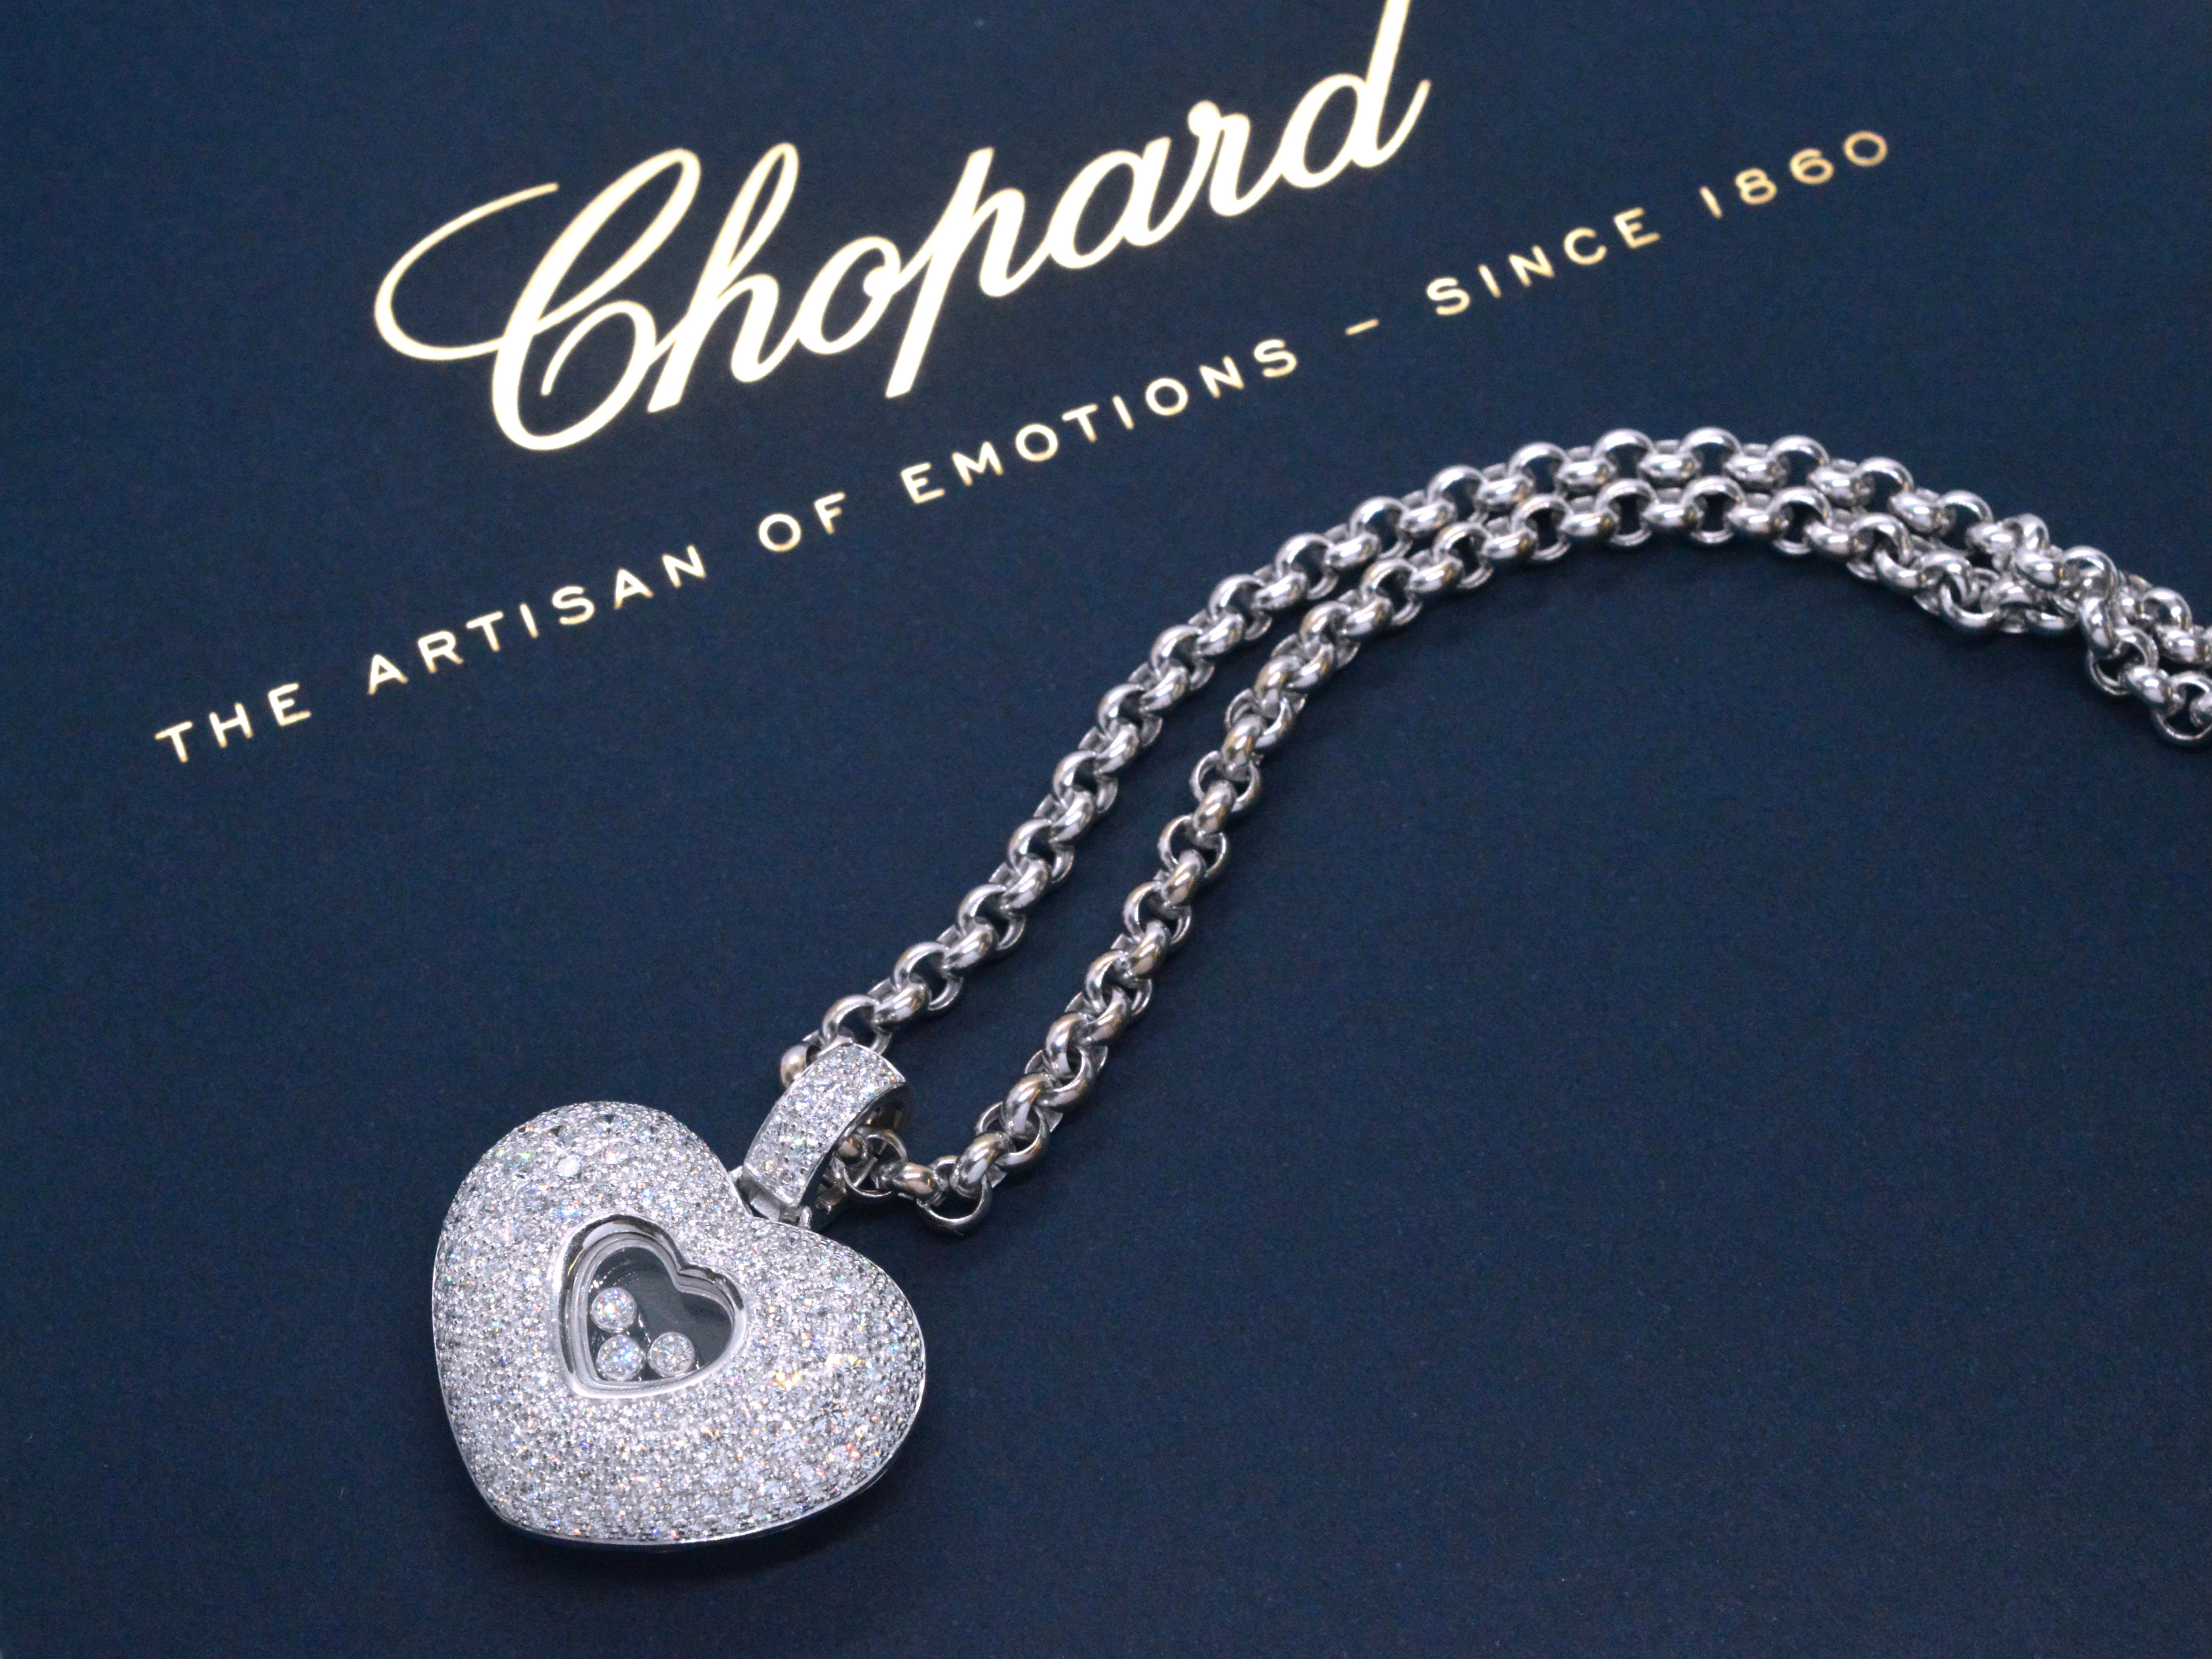 This stunning Chopard necklace is an exquisite piece from the Happy Hearts Diamonds collection, known for its exceptional craftsmanship and luxurious design. Featuring a very large pendant adorned with original Chopard diamonds, totaling an